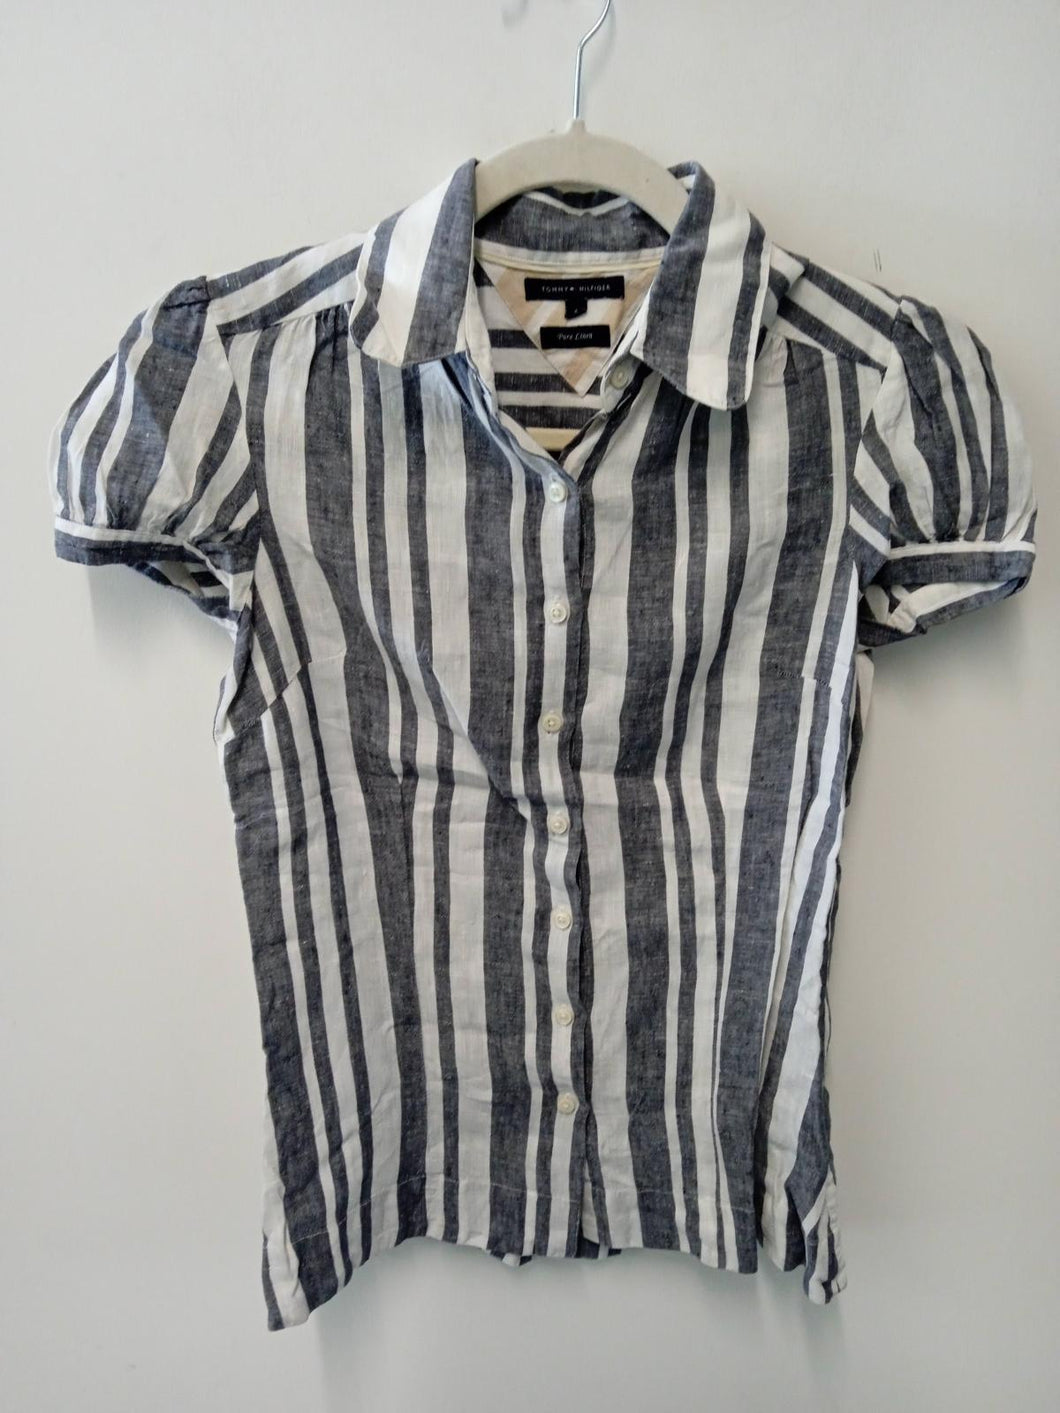 TOMMY HILFIGER Ladies Grey Striped Linen Short Sleeve Collared T-Shirt Size UK8